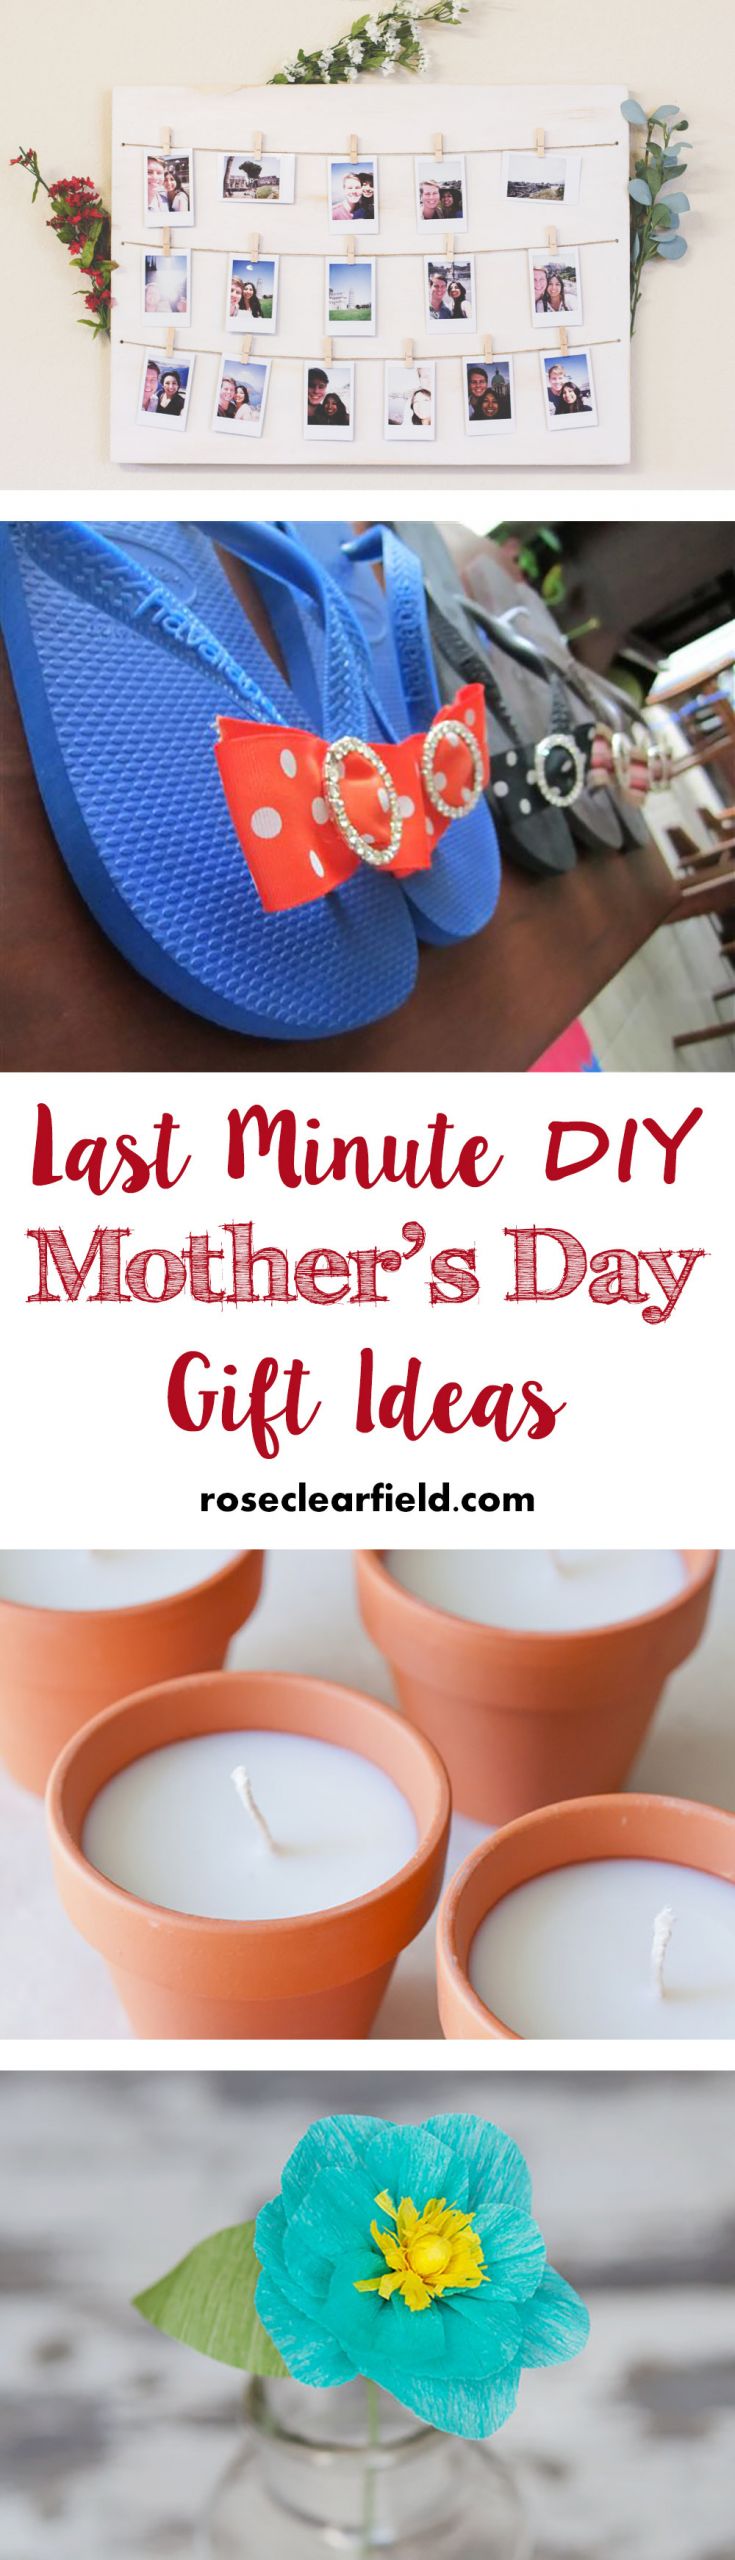 Last Minute Mother's Day Gifts
 Last Minute DIY Mother s Day Gift Ideas • Rose Clearfield